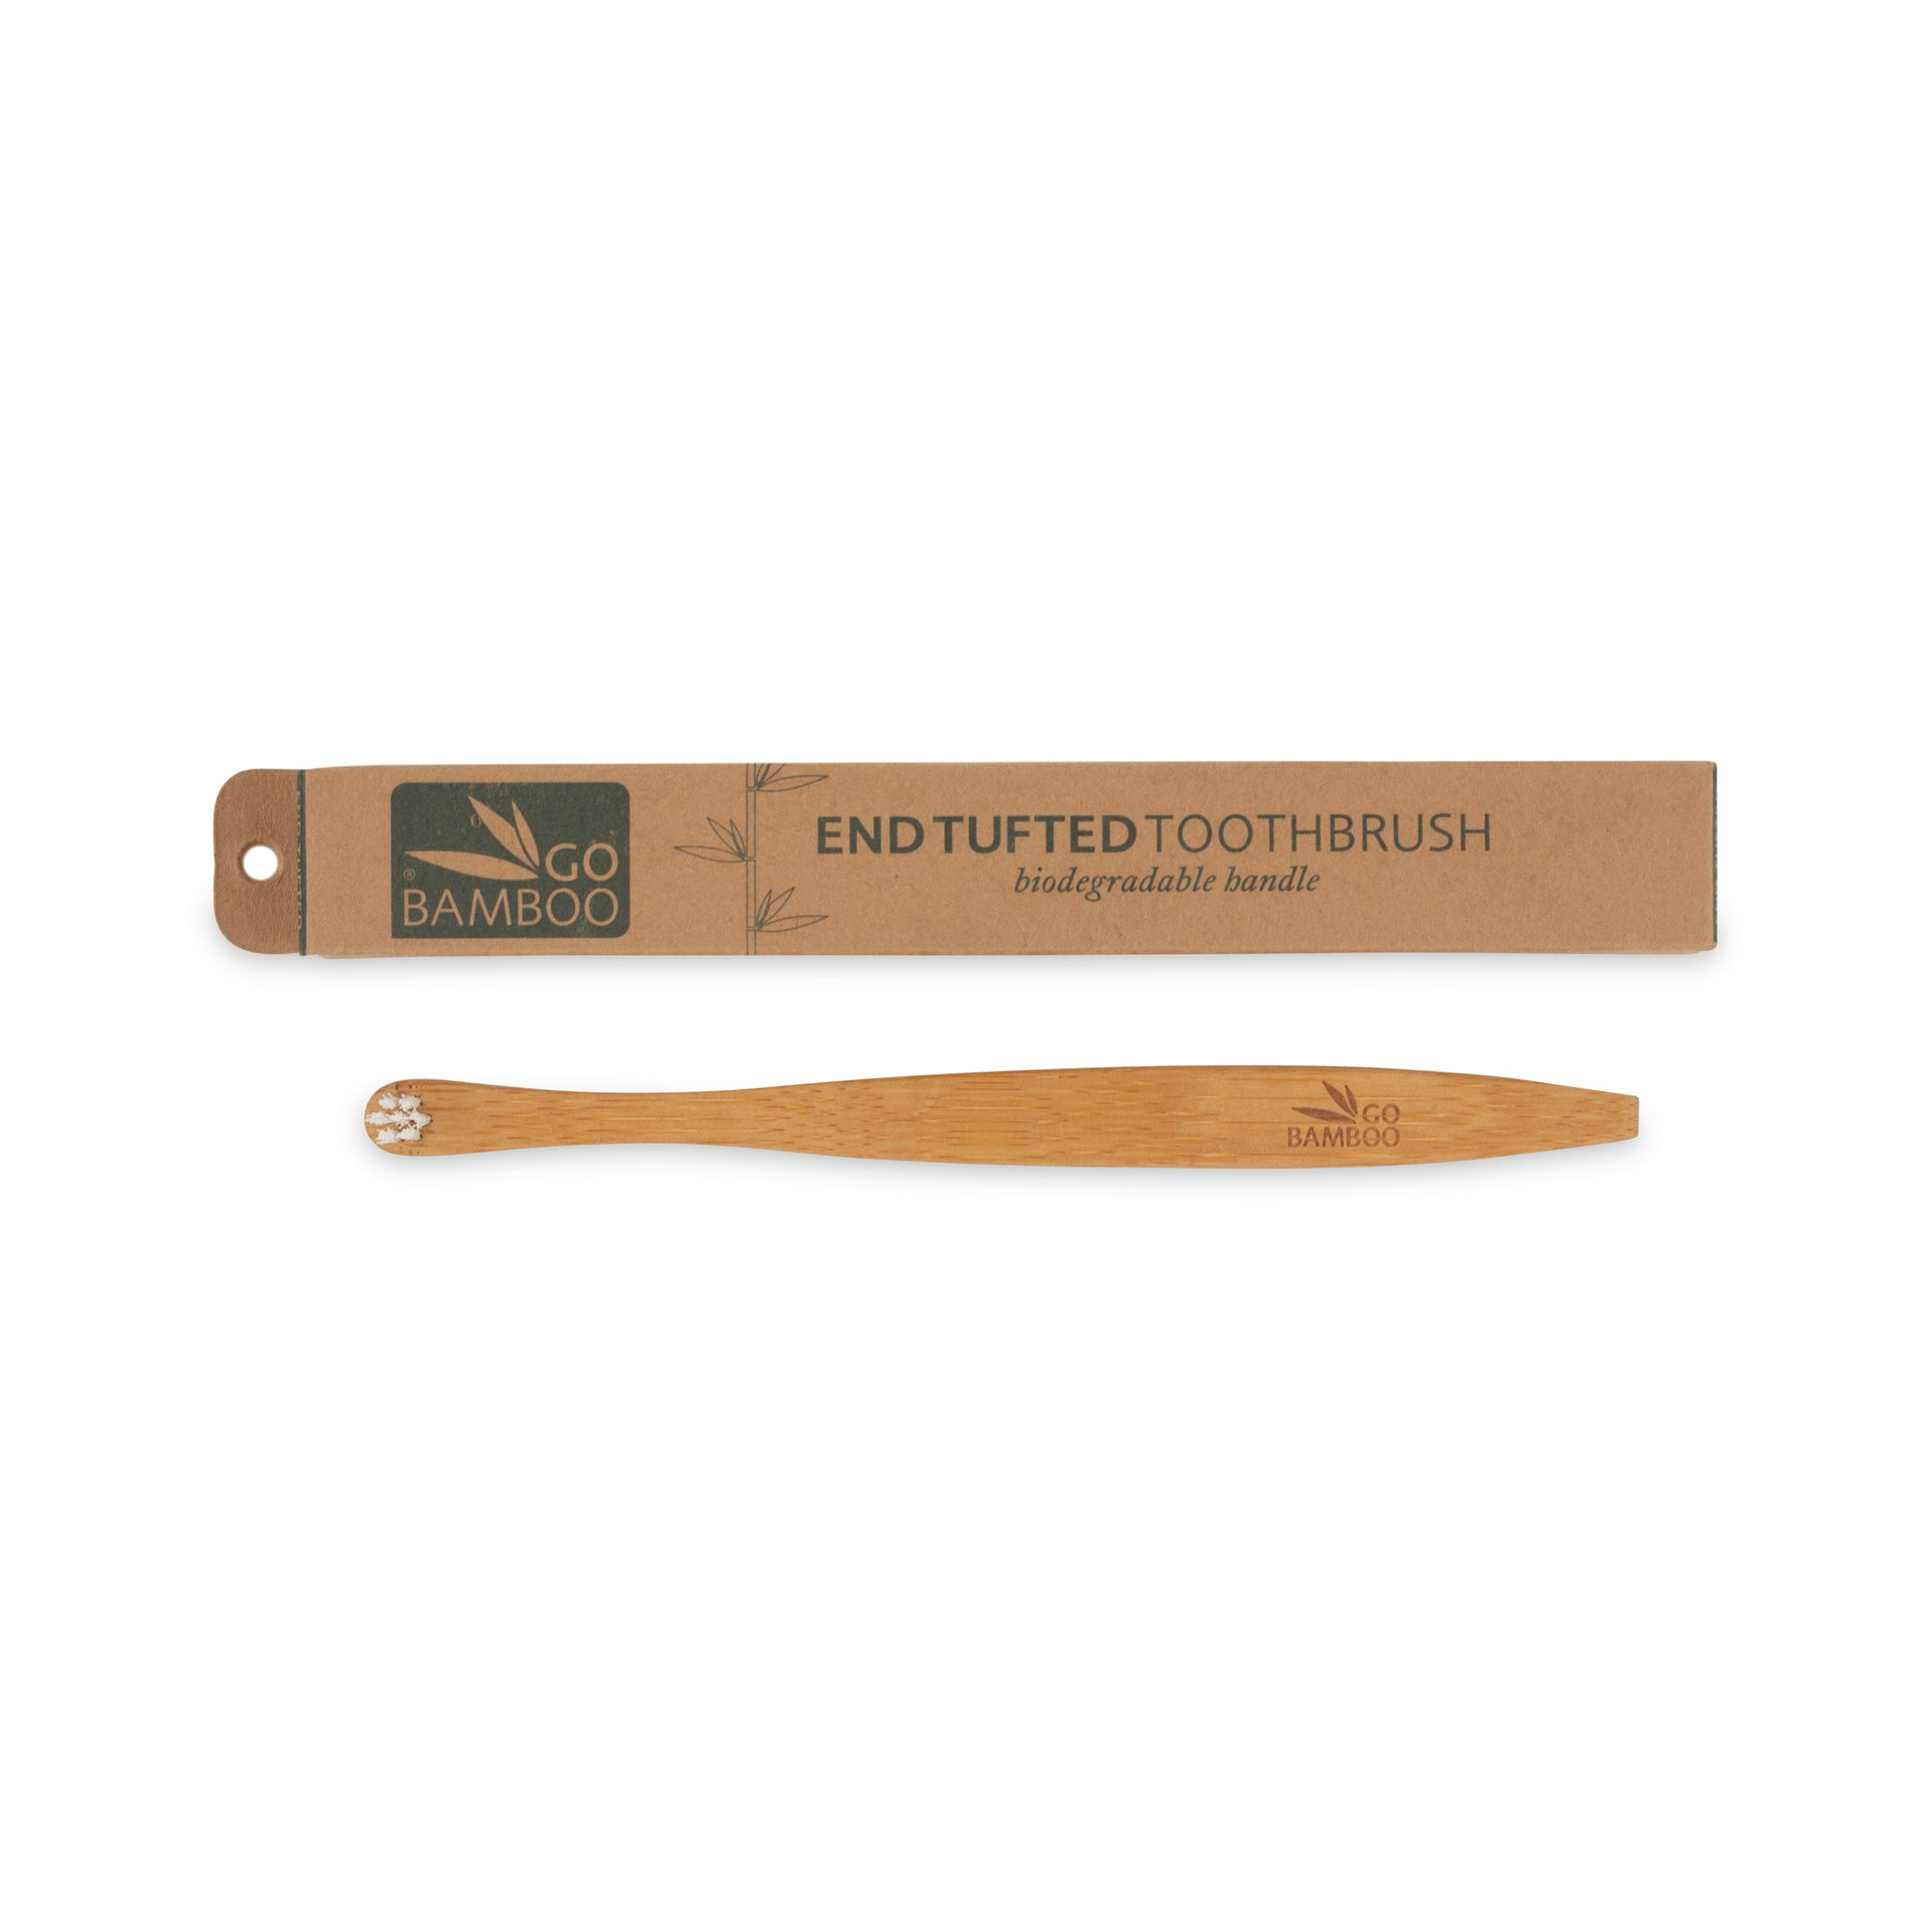 Bamboo End Tufted Toothbrush - End Tufted toothbrush - Go Bamboo